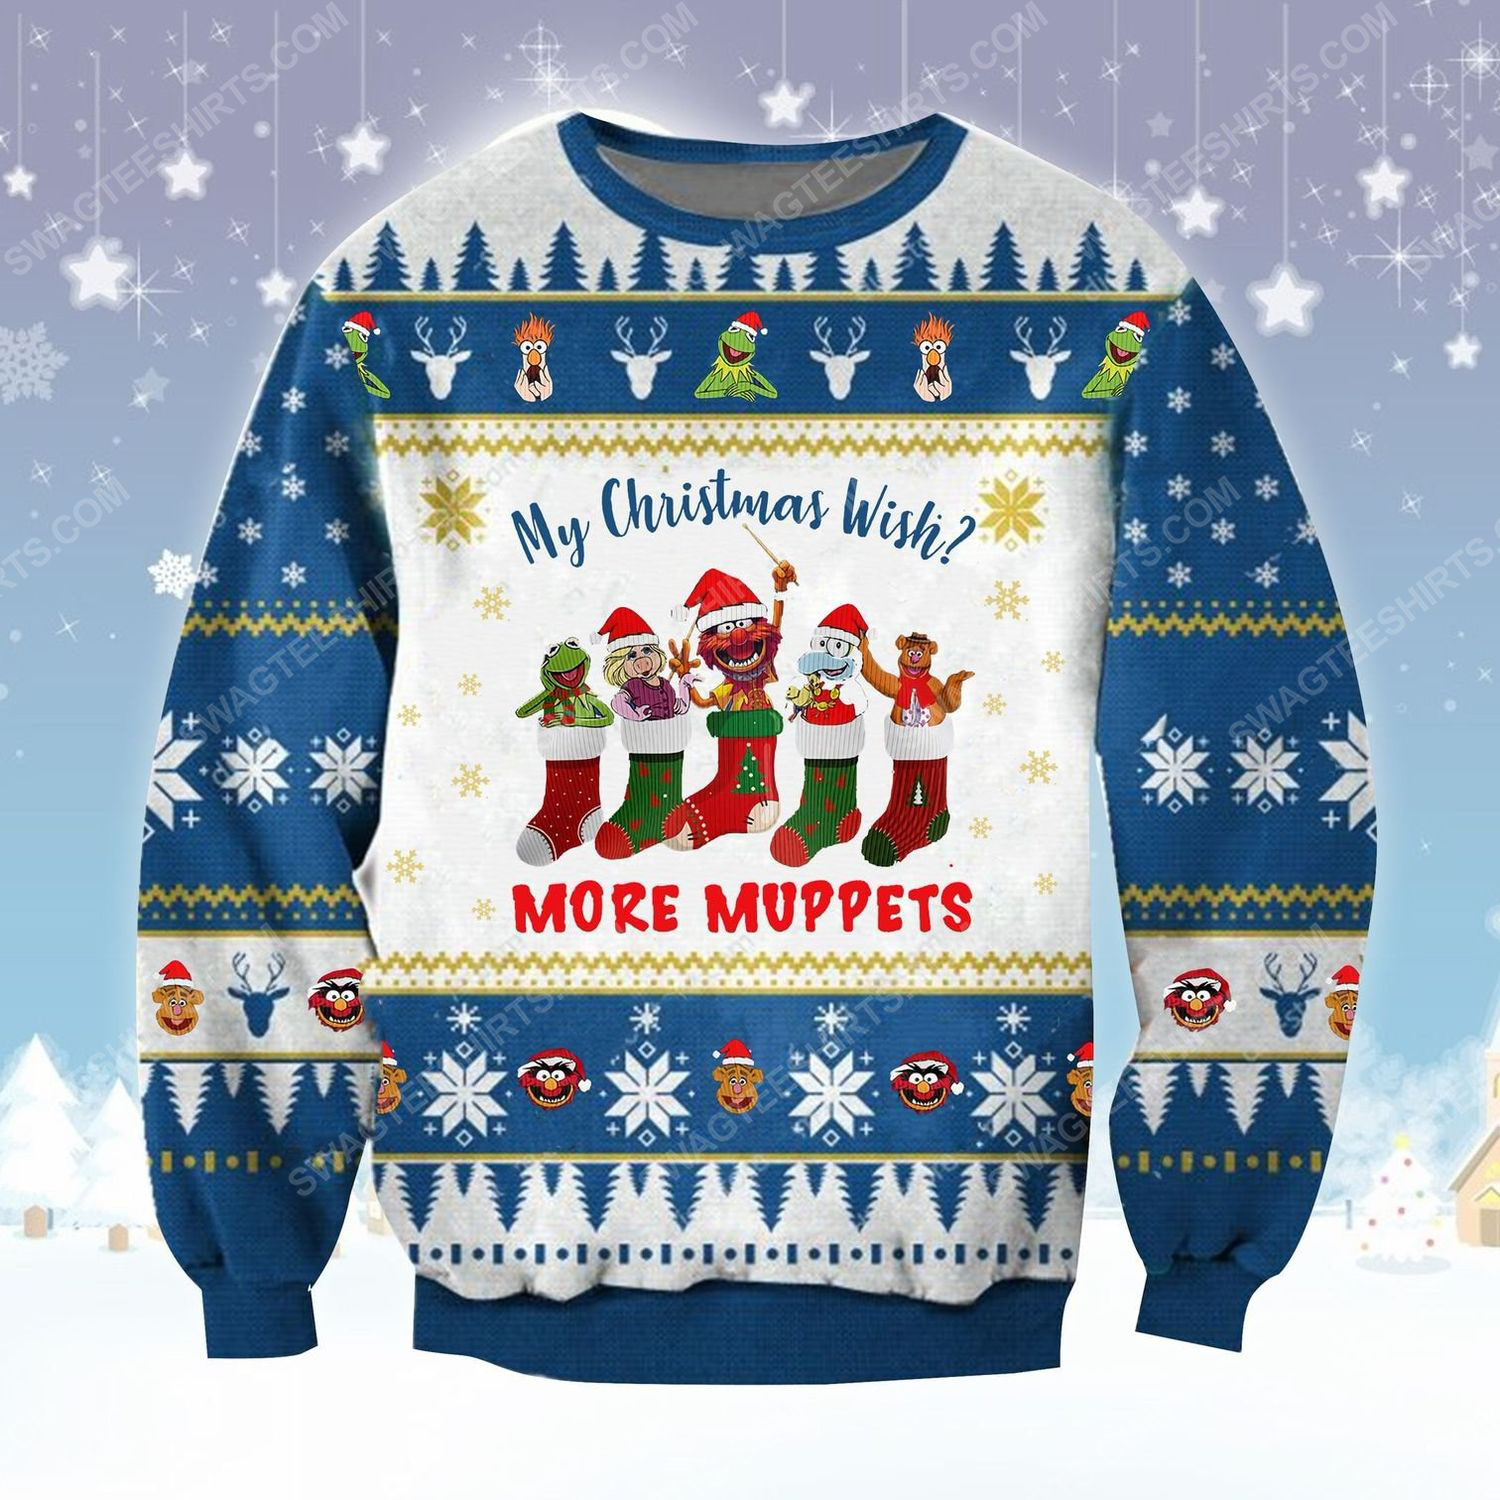 My christmas wish more muppets ugly christmas sweater - Copy